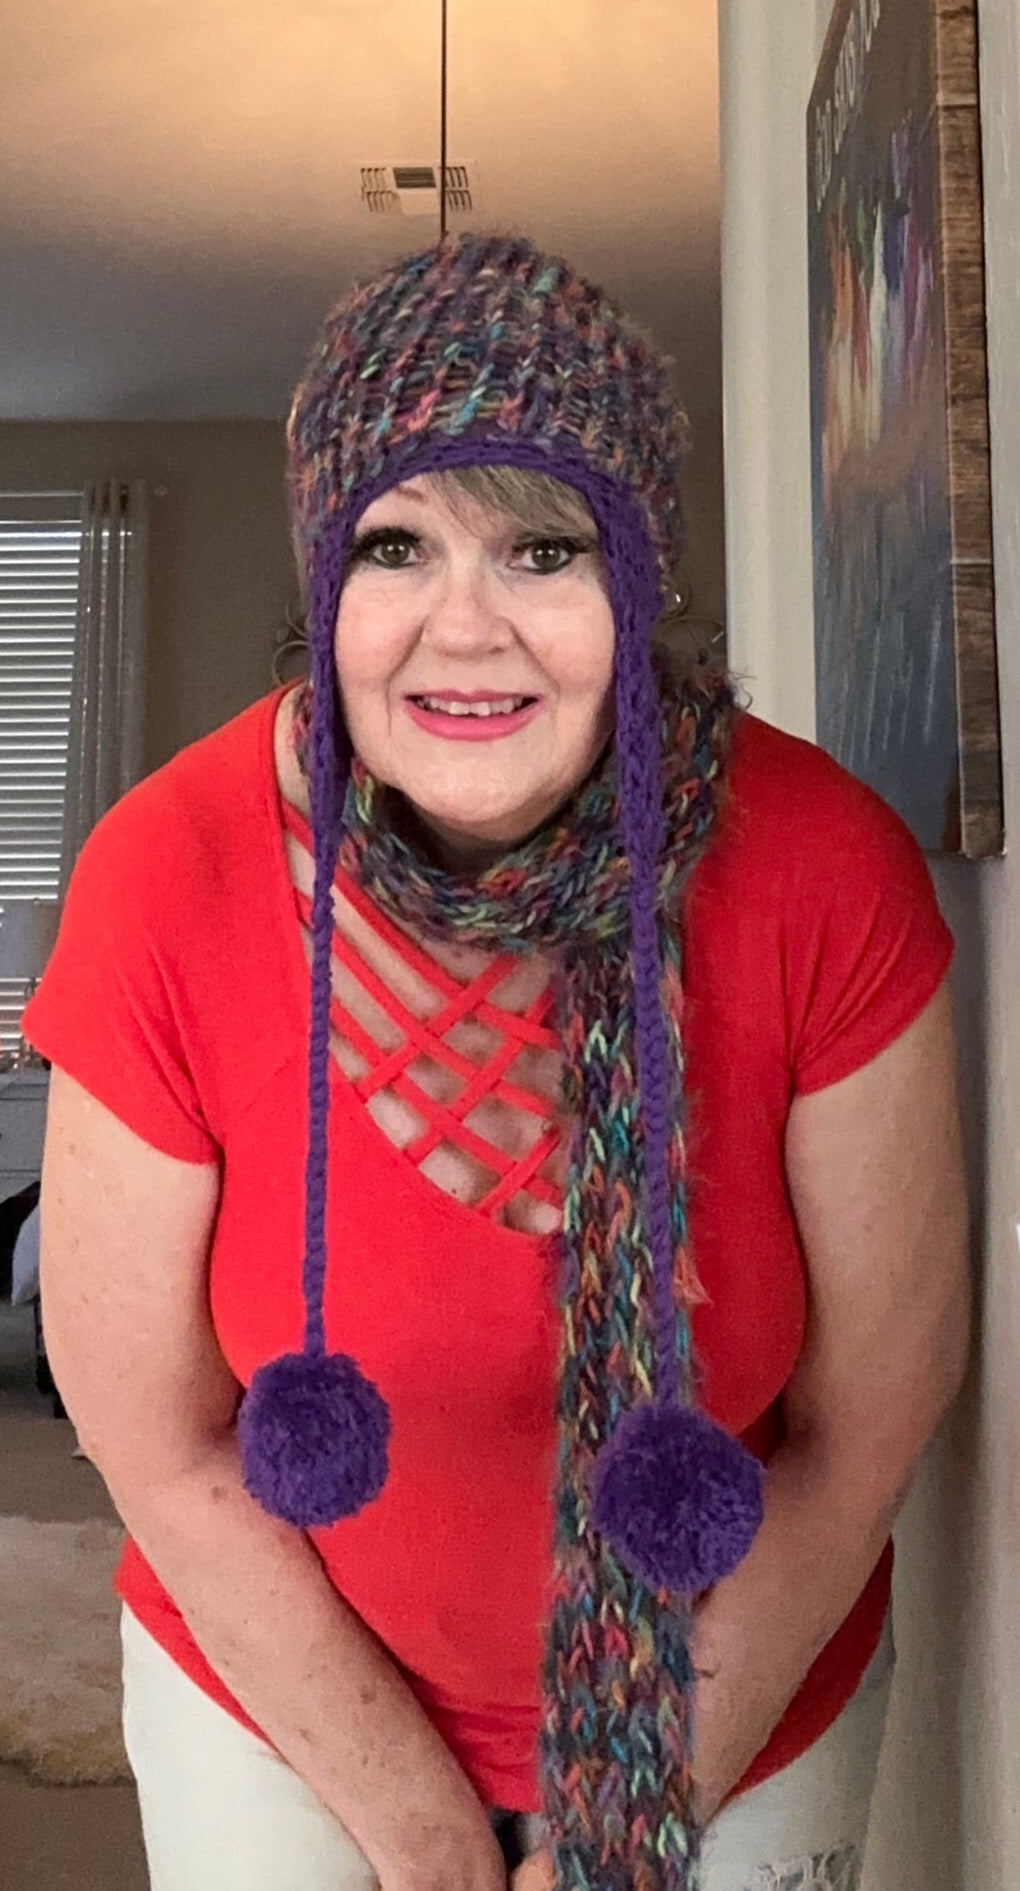 Multi-Colored Purple & Turquoise Hand Crocheted Ear Flap Hat w/ Pom Poms w/ Matching Scarf